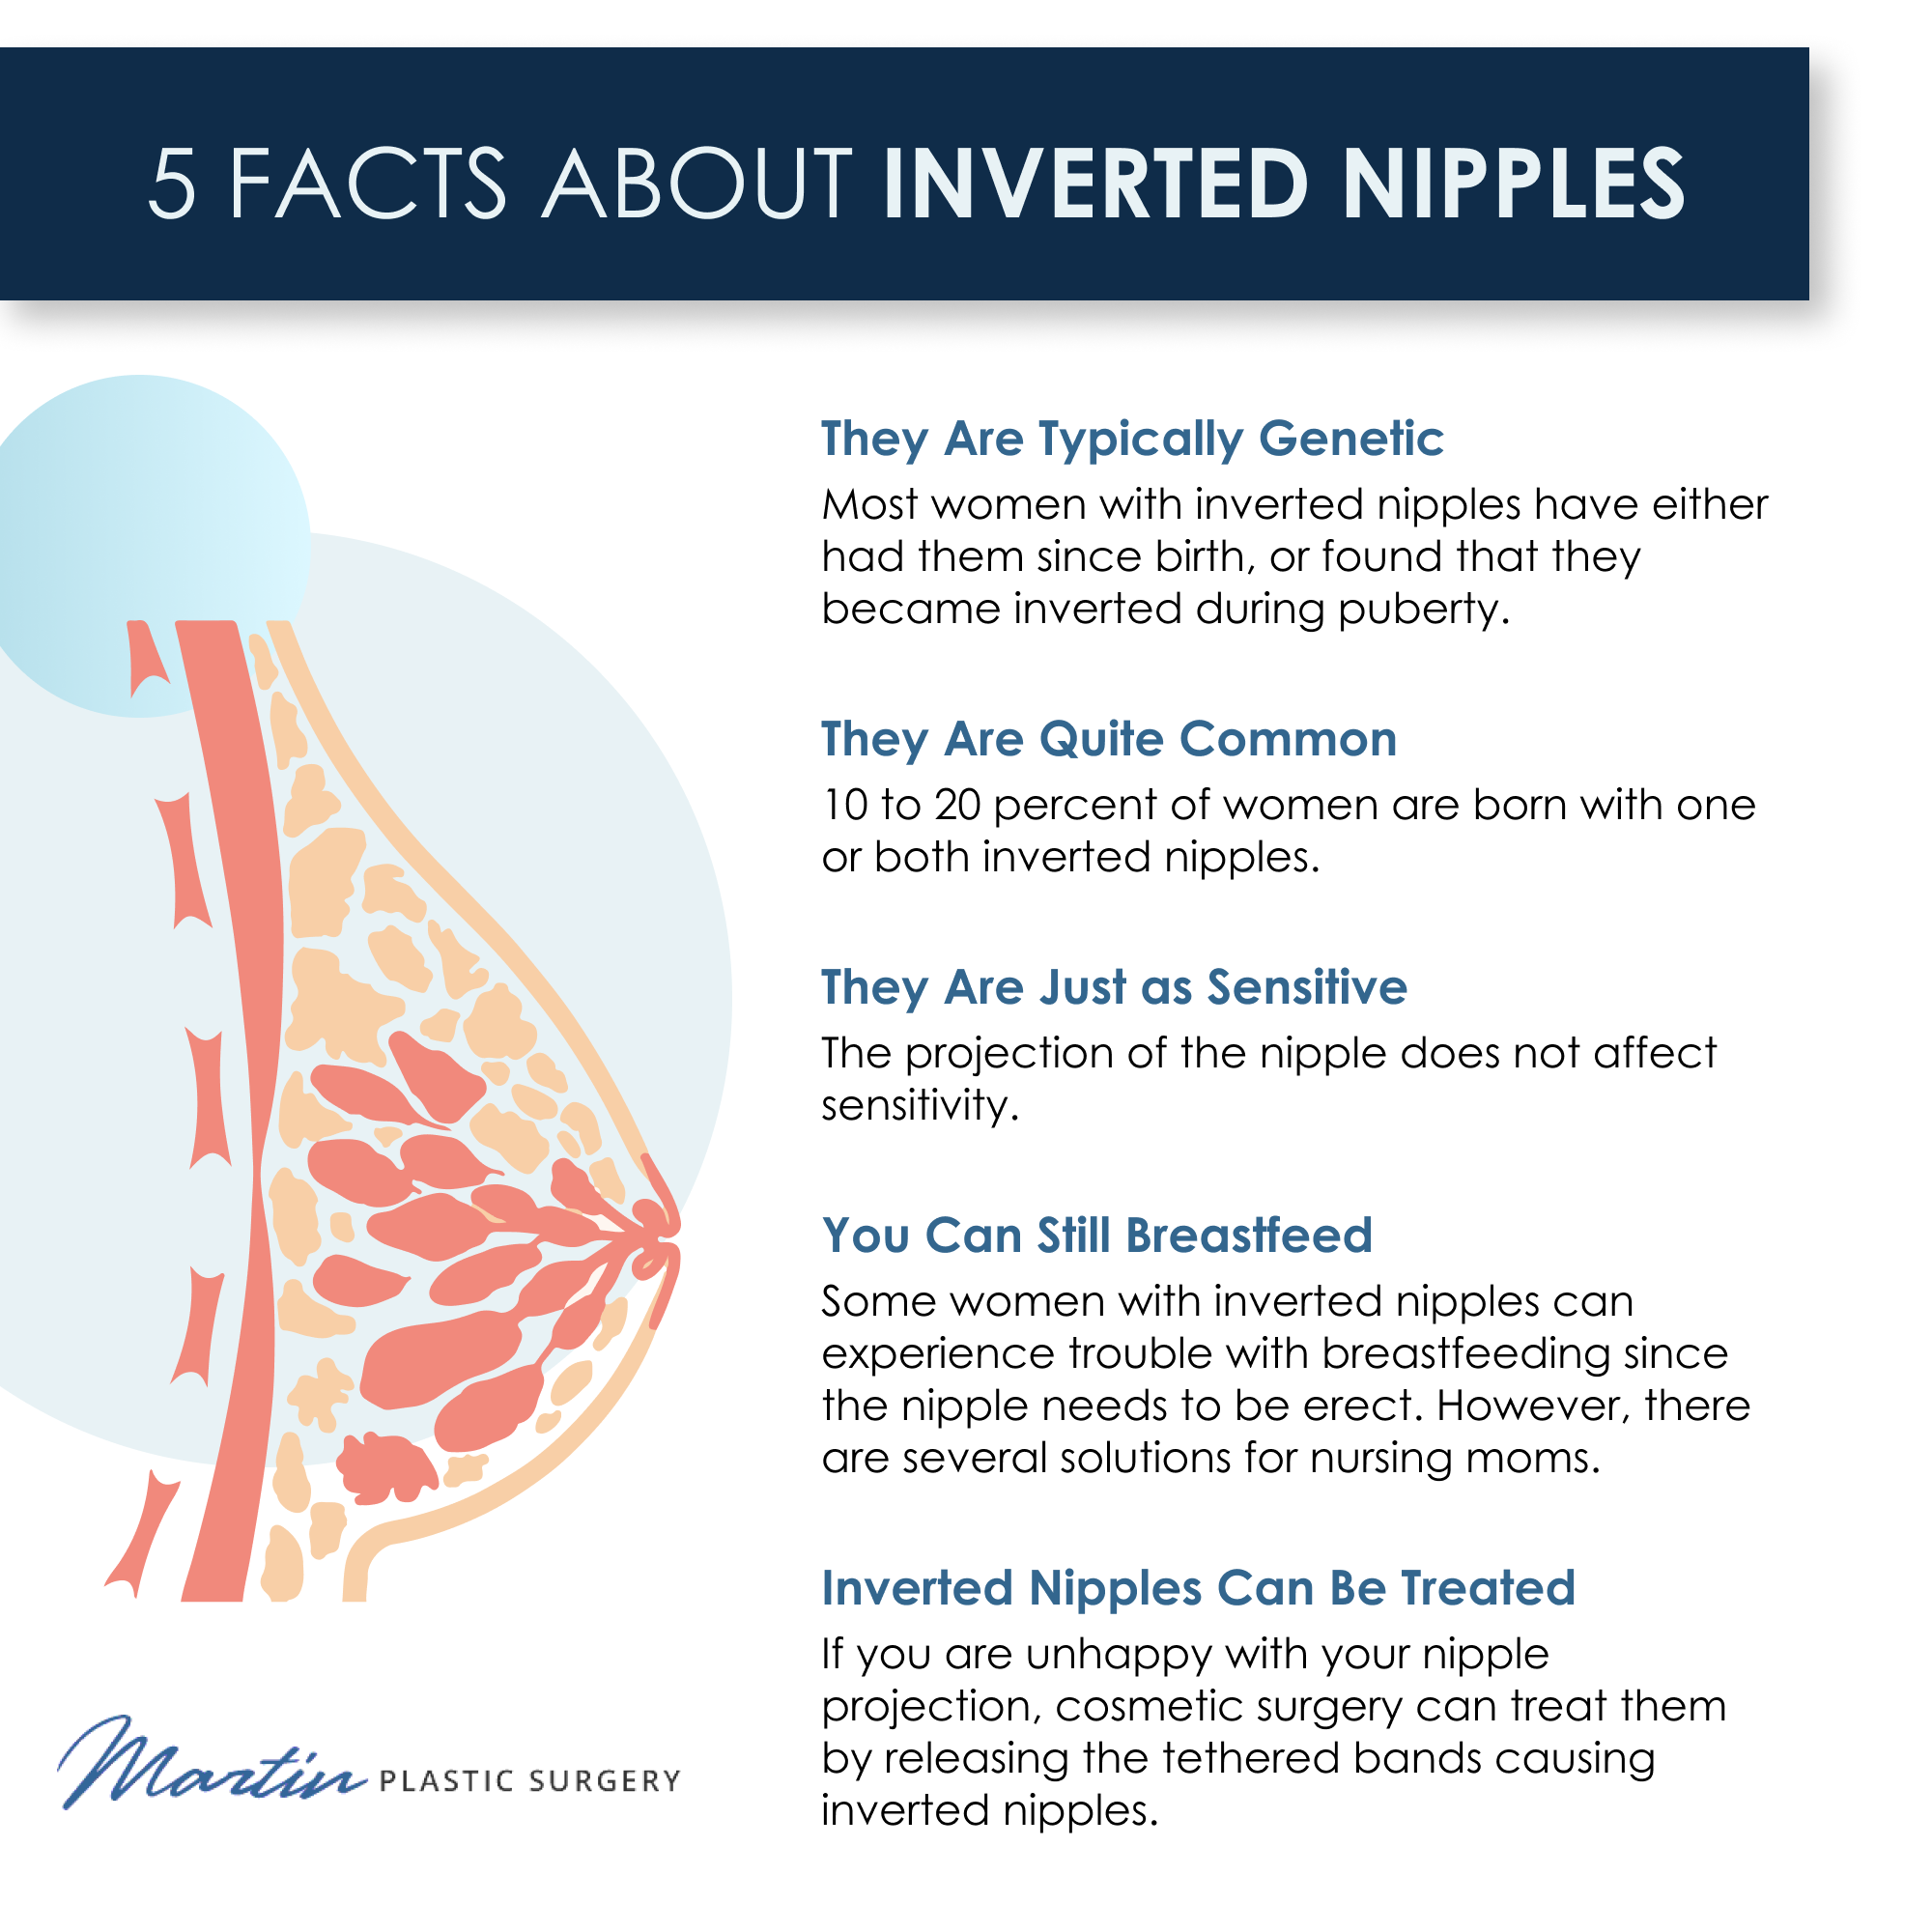 5 FACTS ABOUT INVERTED NIPPLES